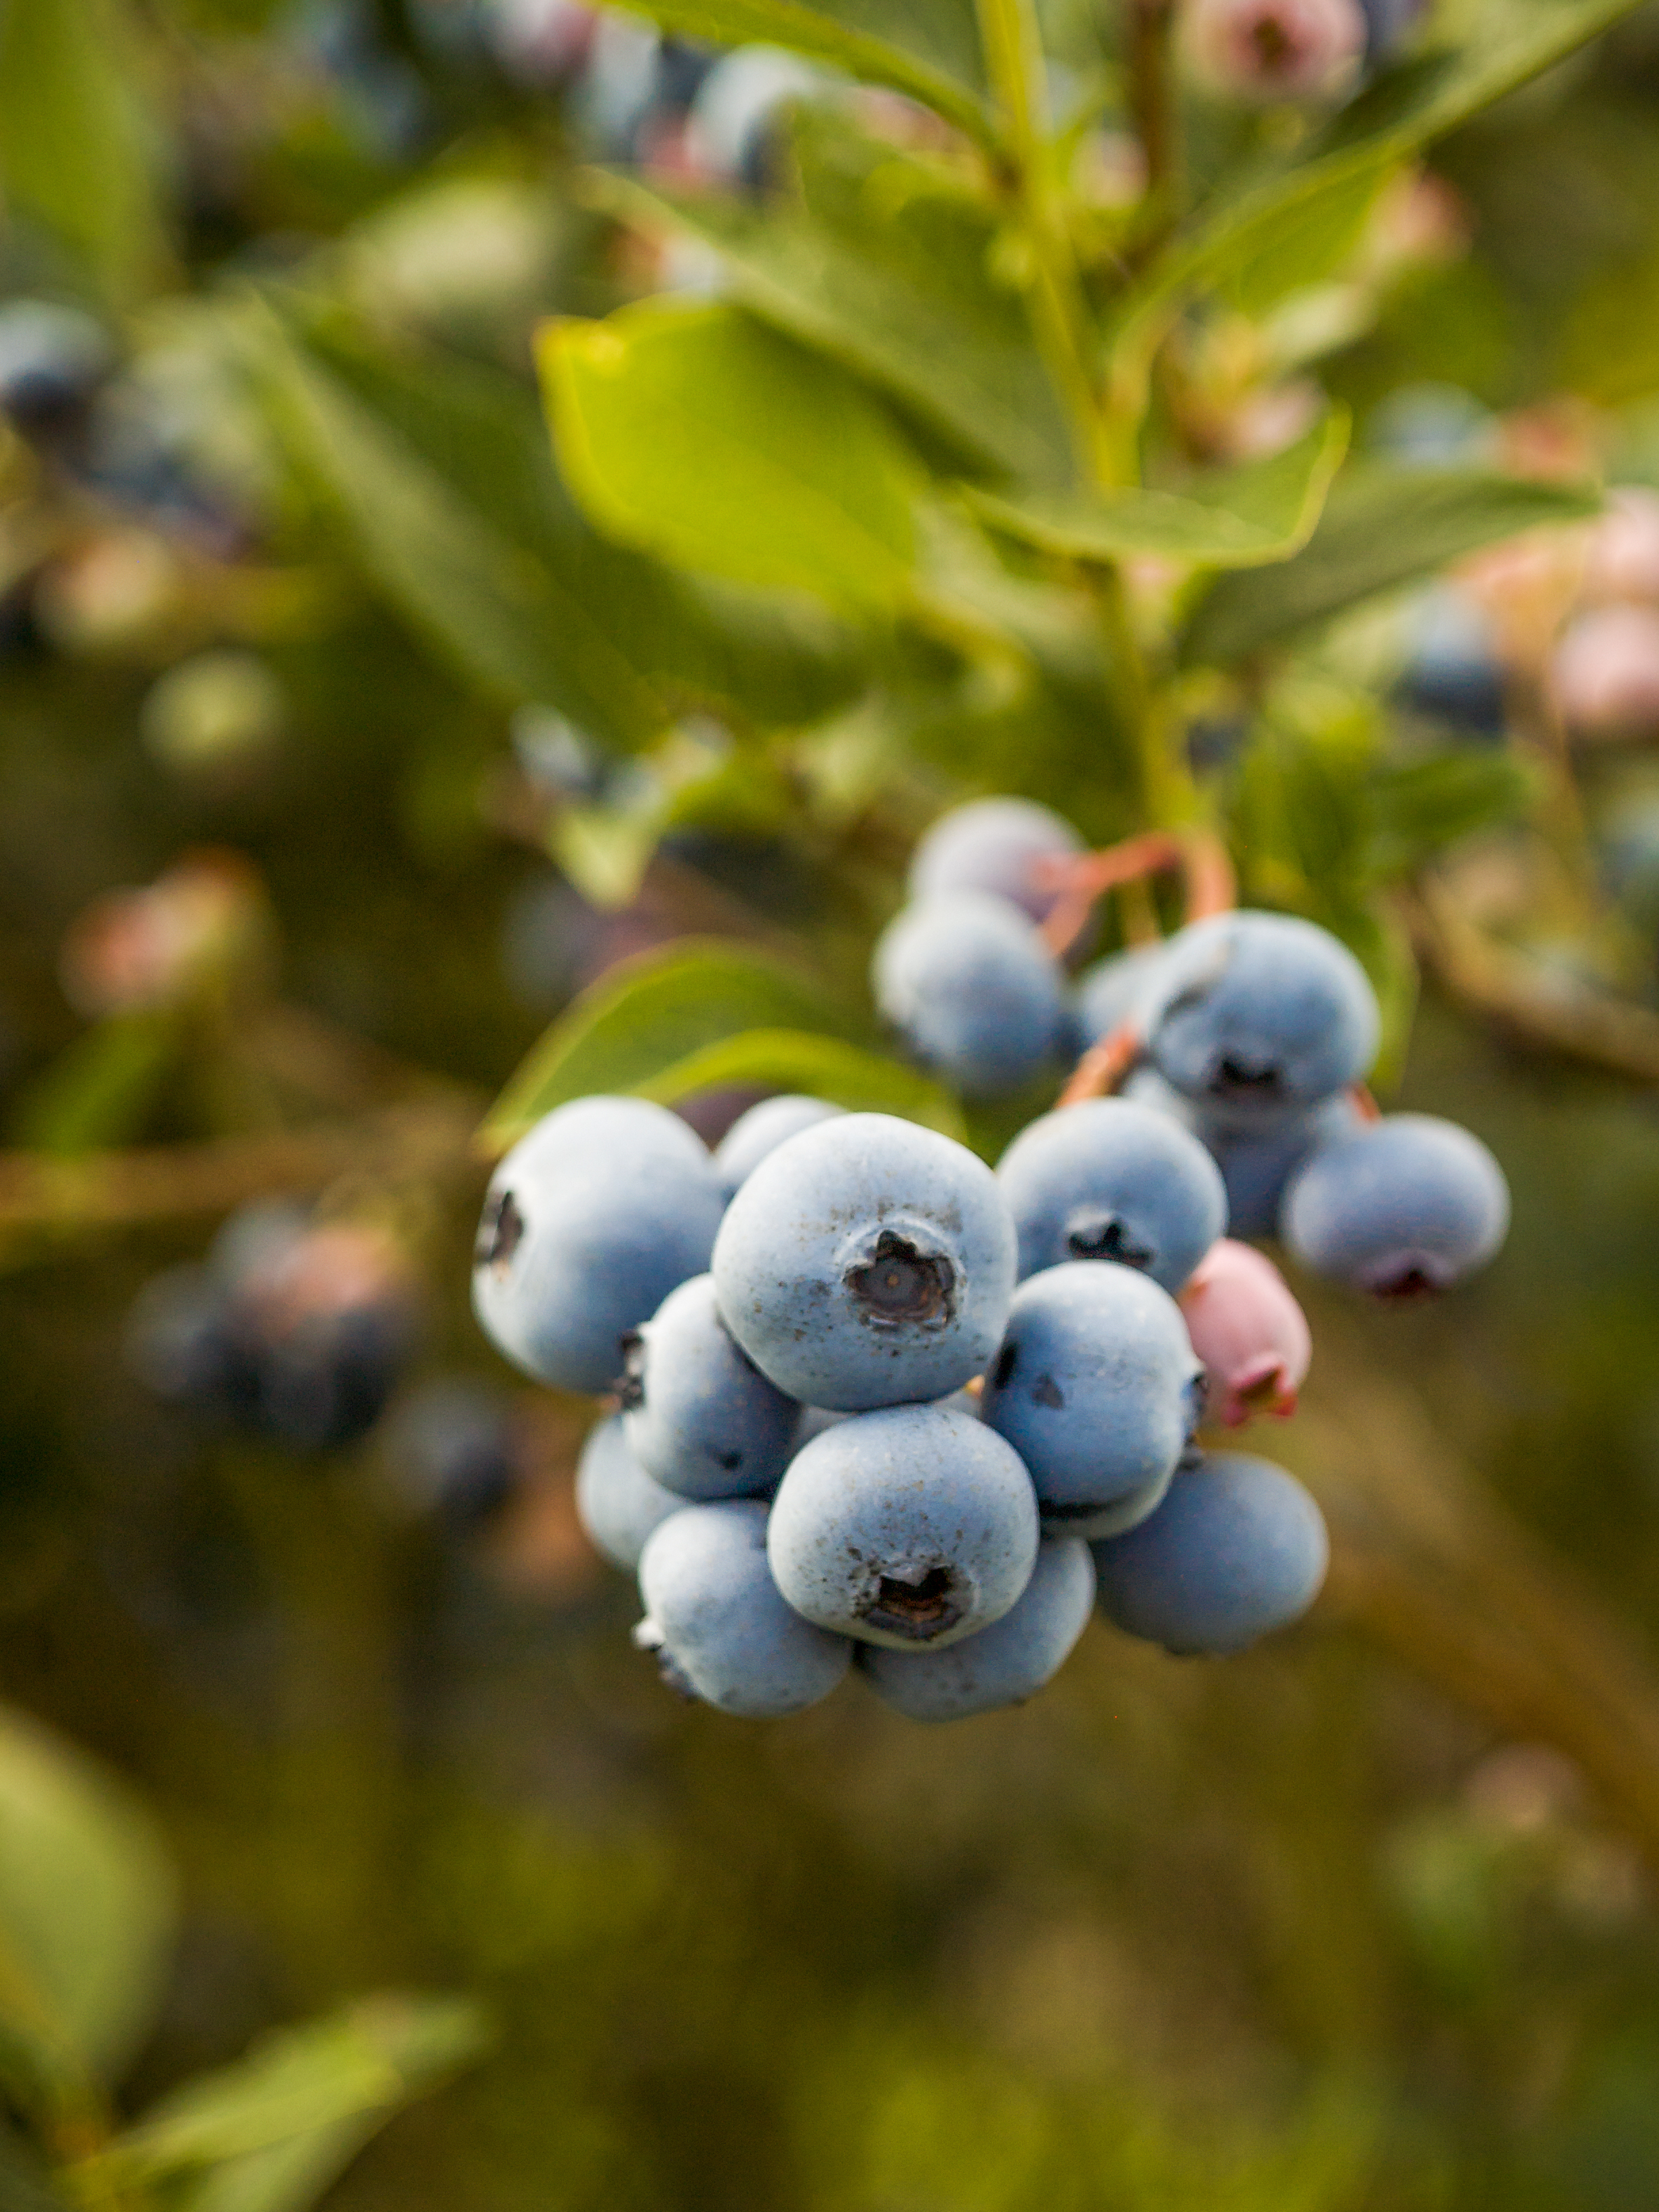 Flowering and Pollination – One of the Most Critical Blueberry Growth Stages